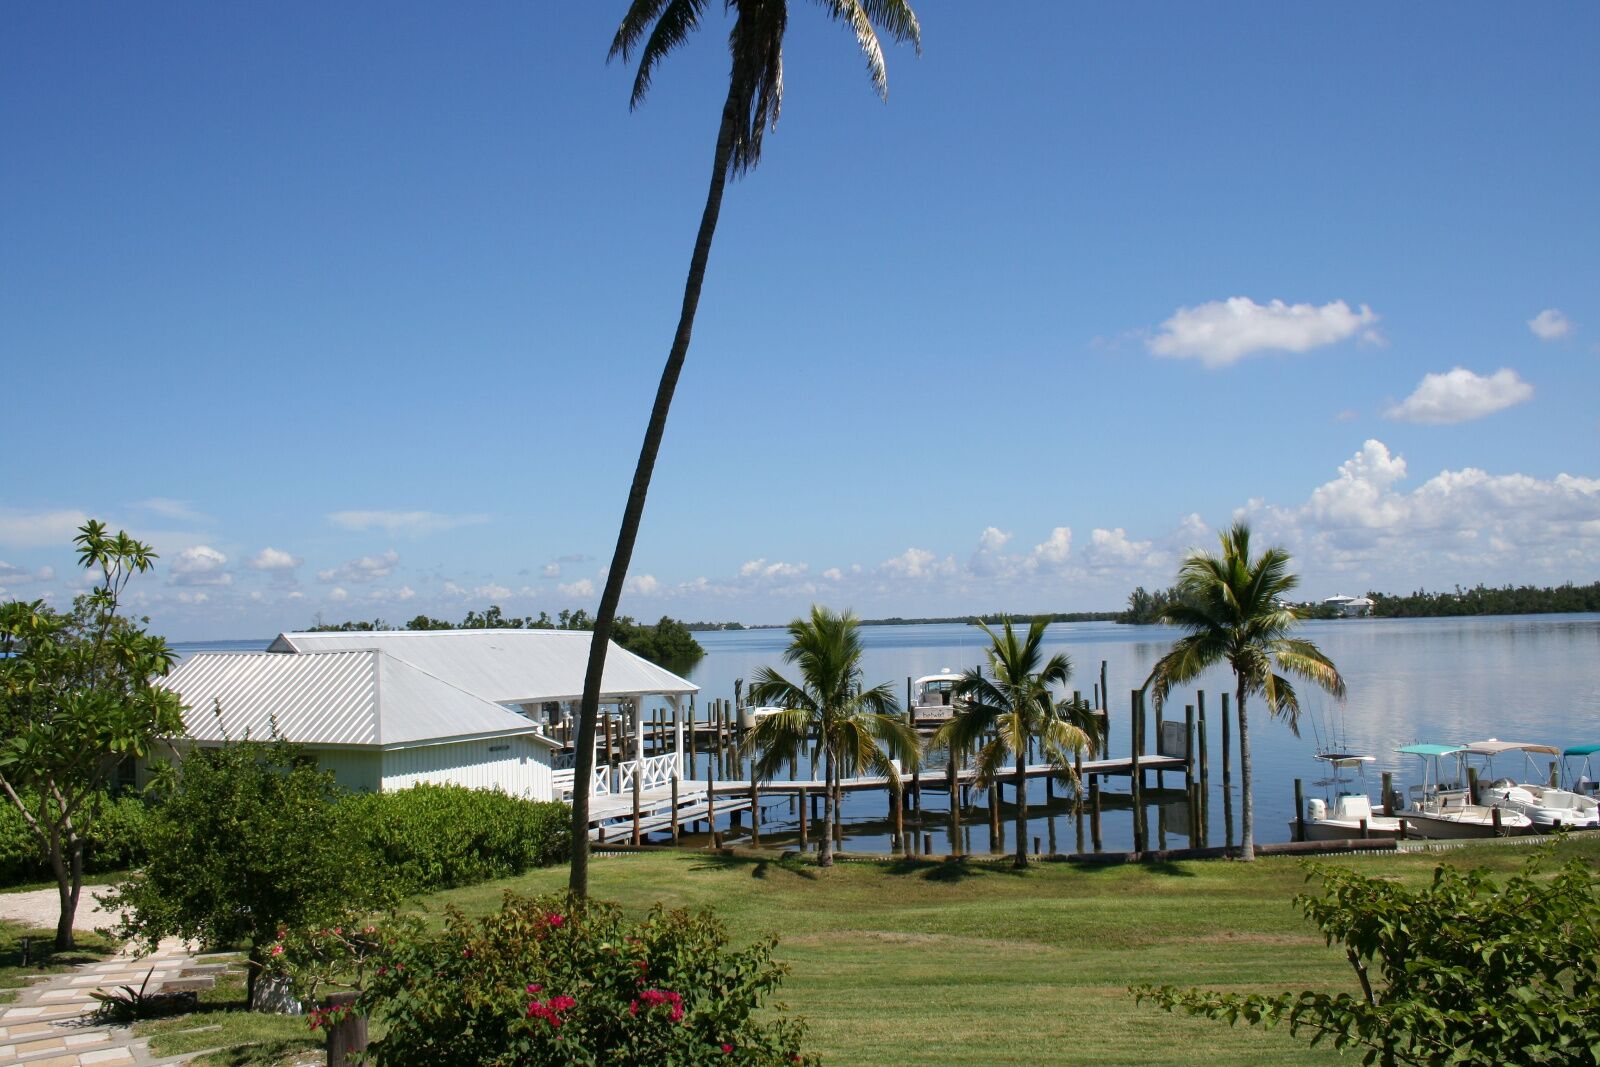 The docks at Cabbage Key near Fort Myers, Florida